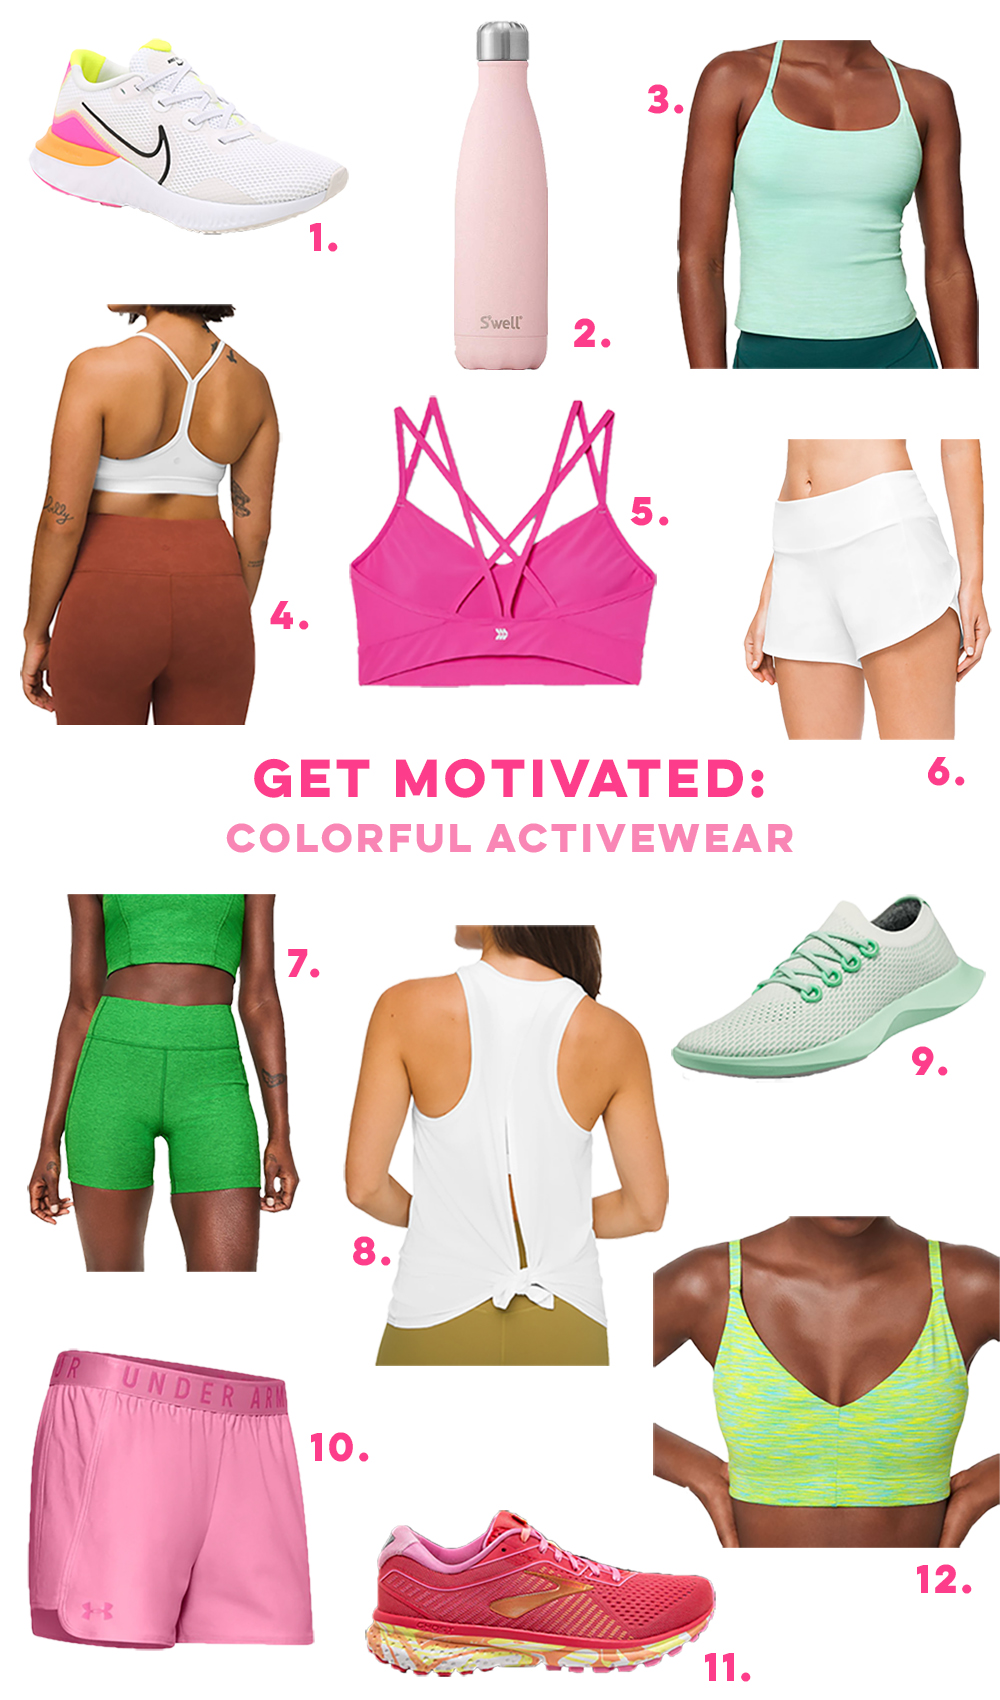 My Favorite Activewear Pieces for Working Out / What to Wear When Working Out / What to Wear Running / The Best Running Shoes / Workout Gear 2020 / Workout Clothes 
for Women / Athleticwear Outfits for Women- Sunshine Style, A Florida Based Fashion and Lifestyle Blog